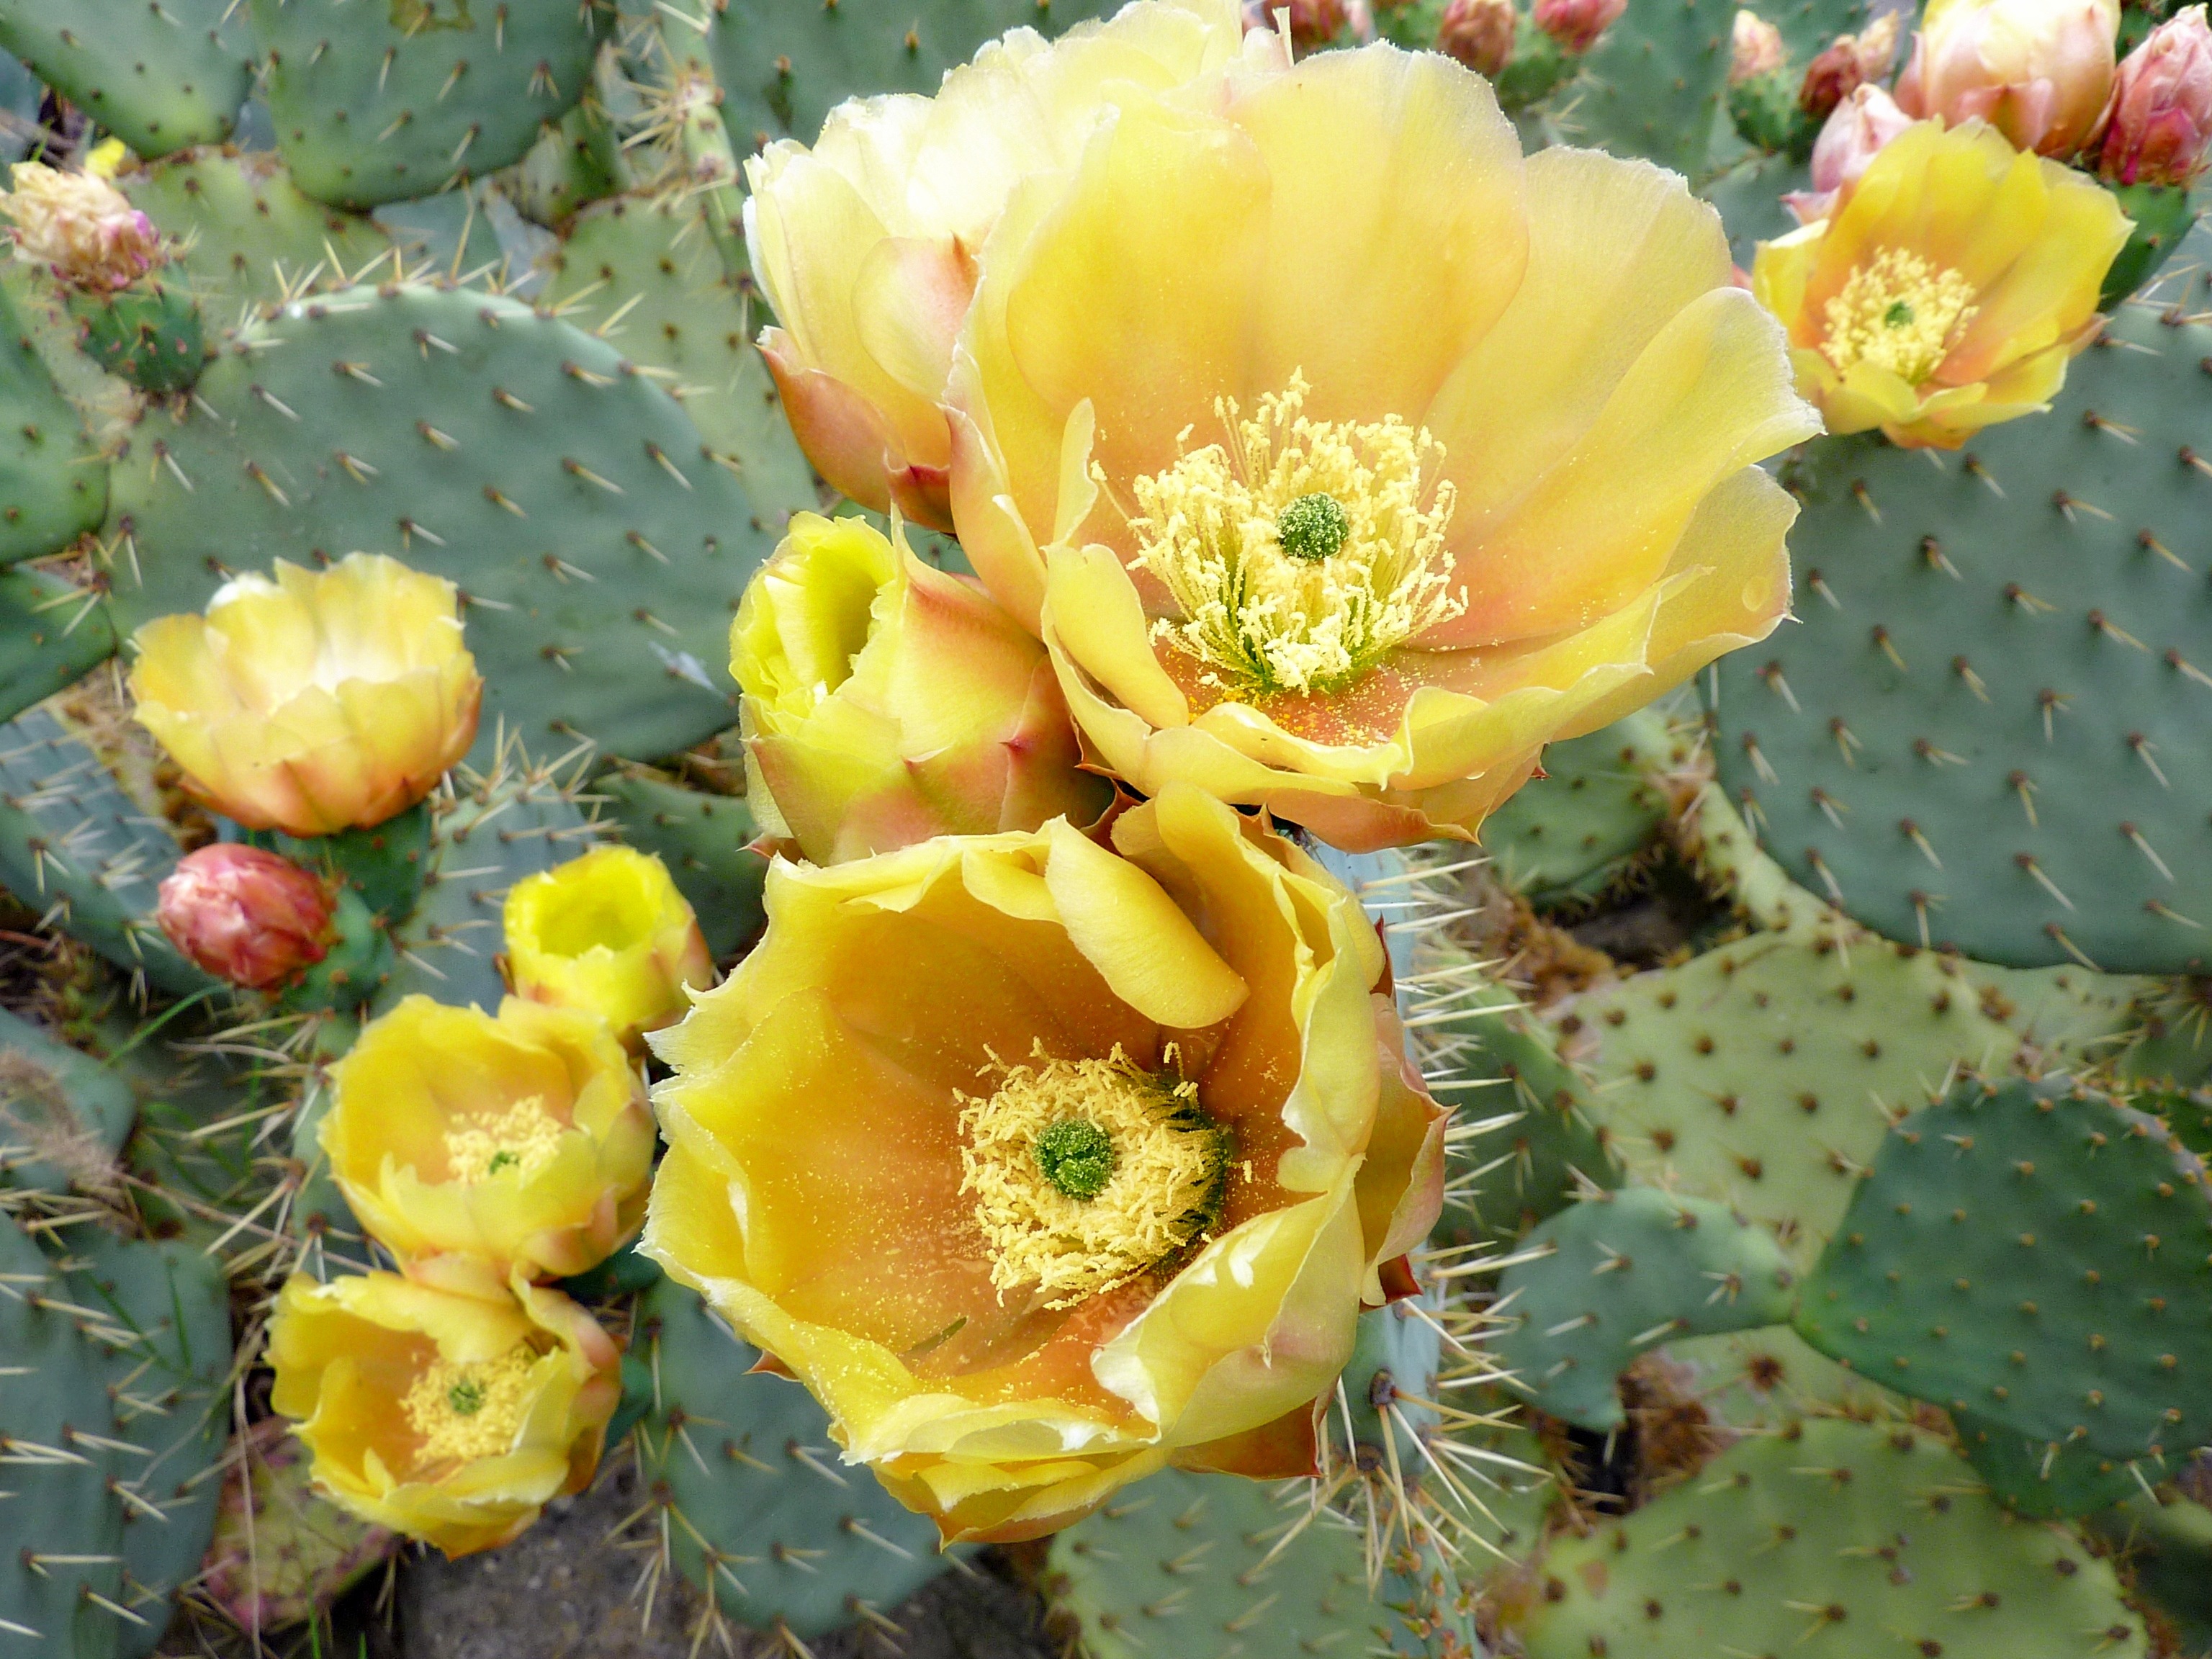 cactus, flowers, thorns, prickles wallpaper for mobile